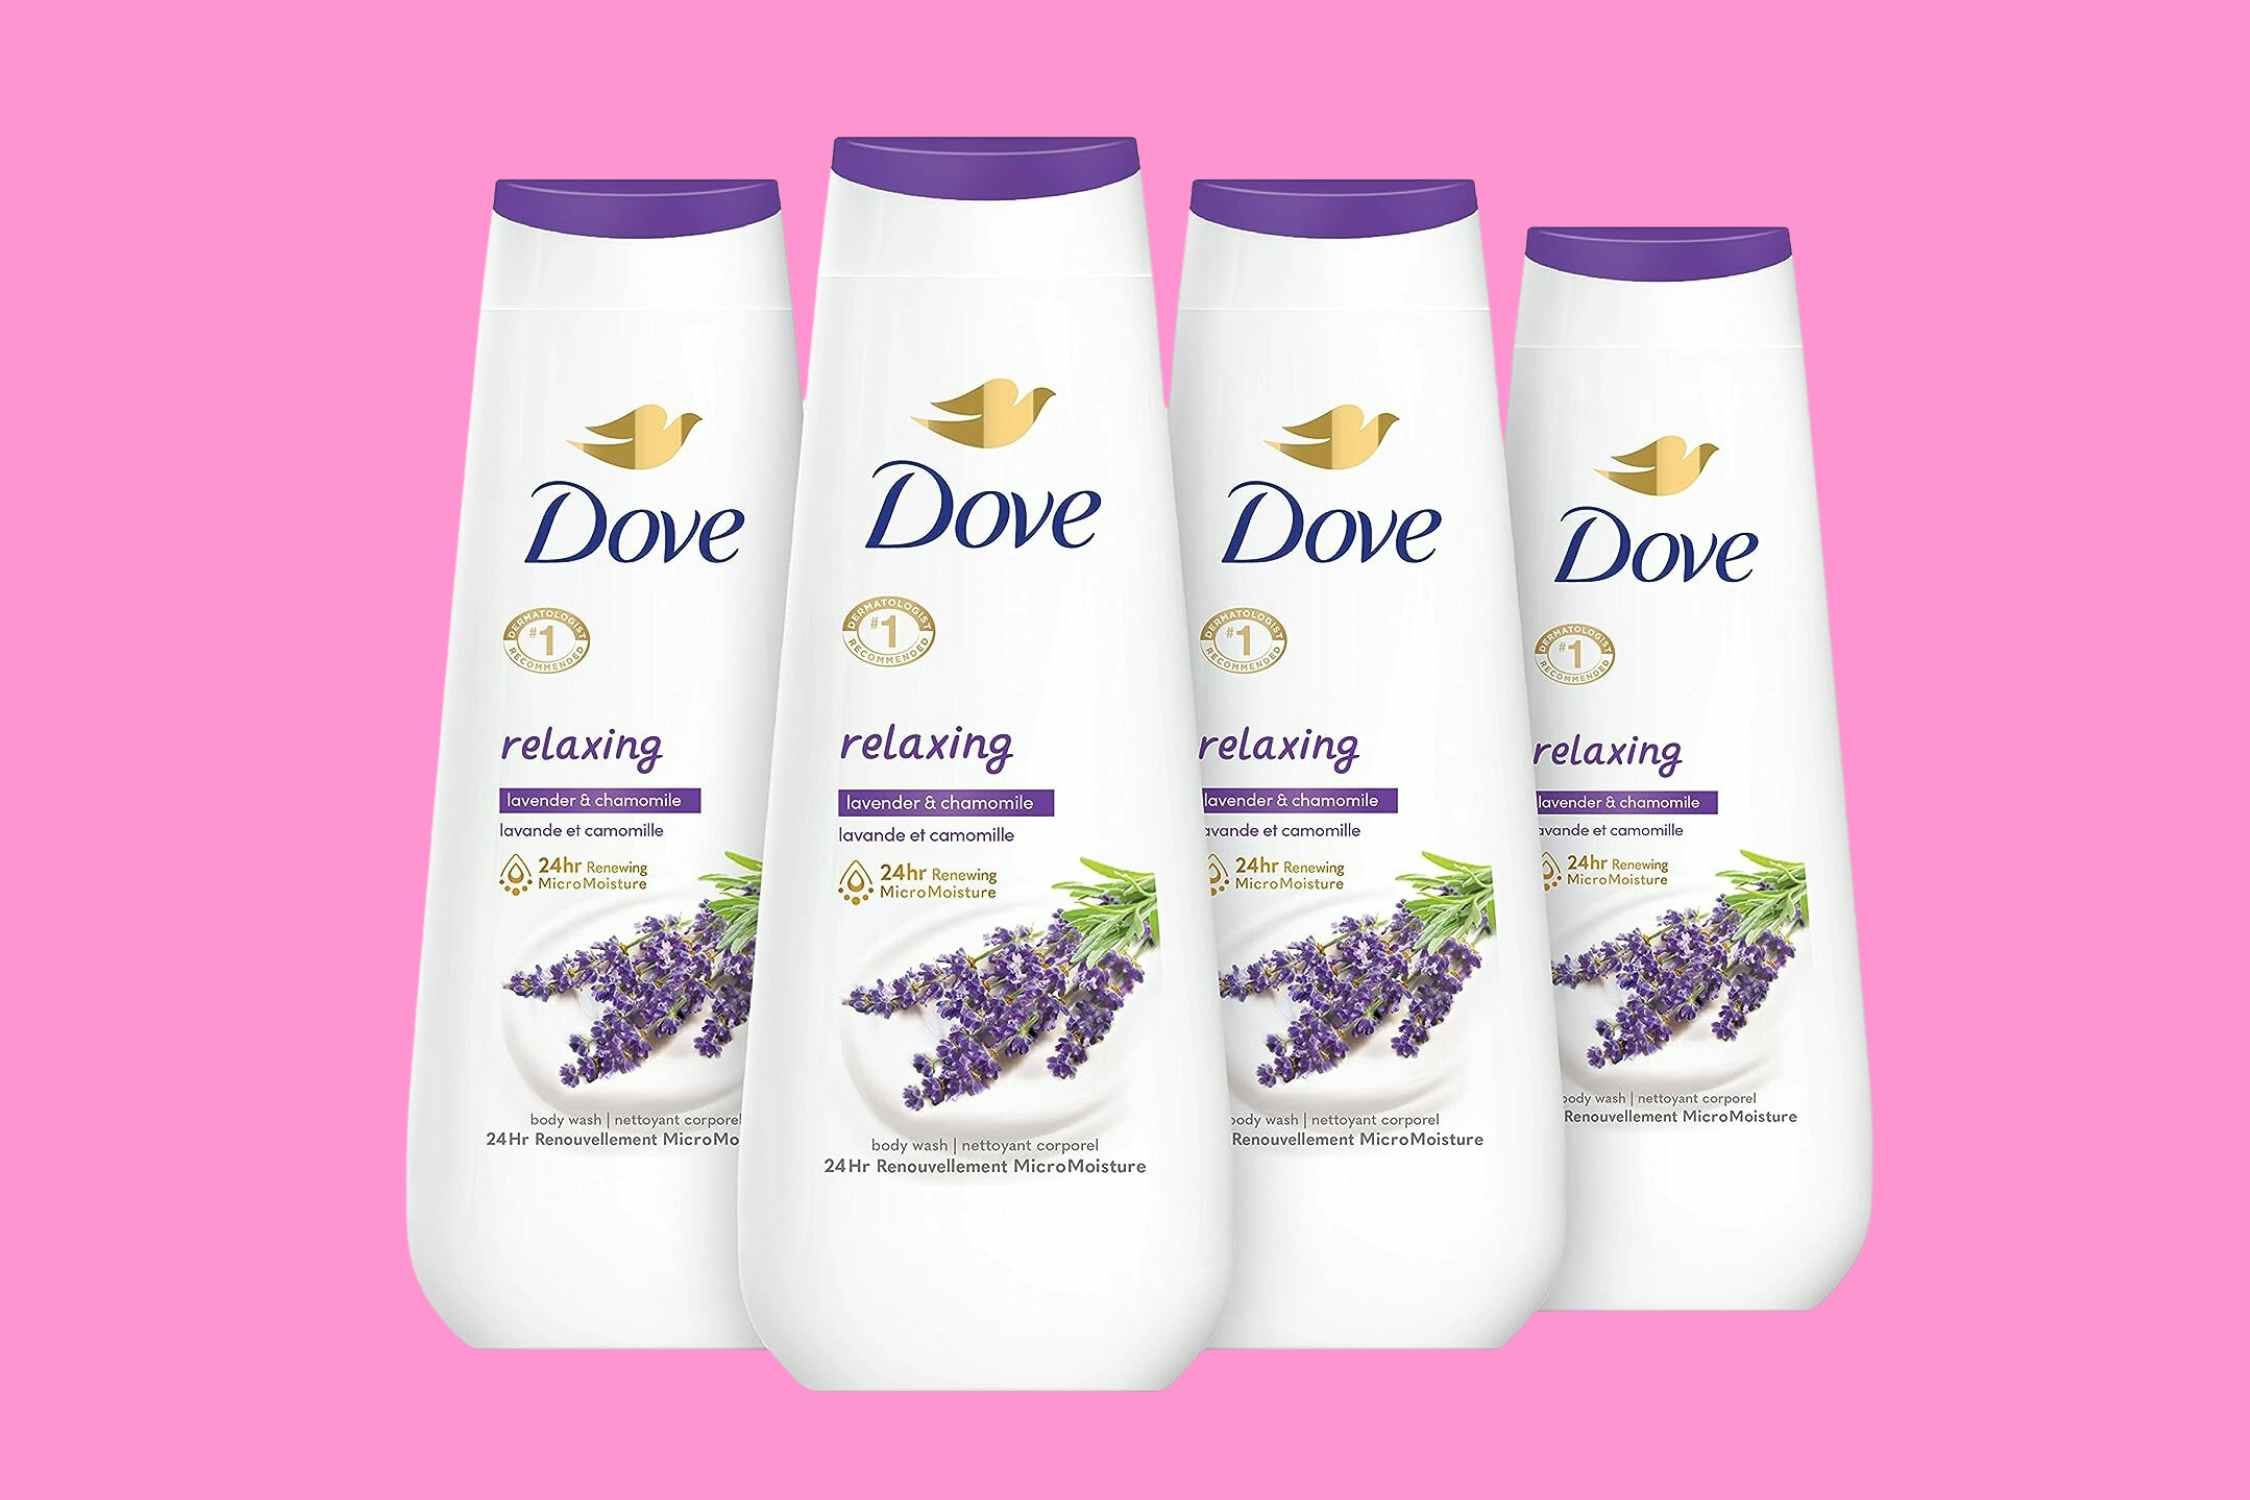 Dove Body Wash Coupon: Get 4 Bottles for $12.38 on Amazon